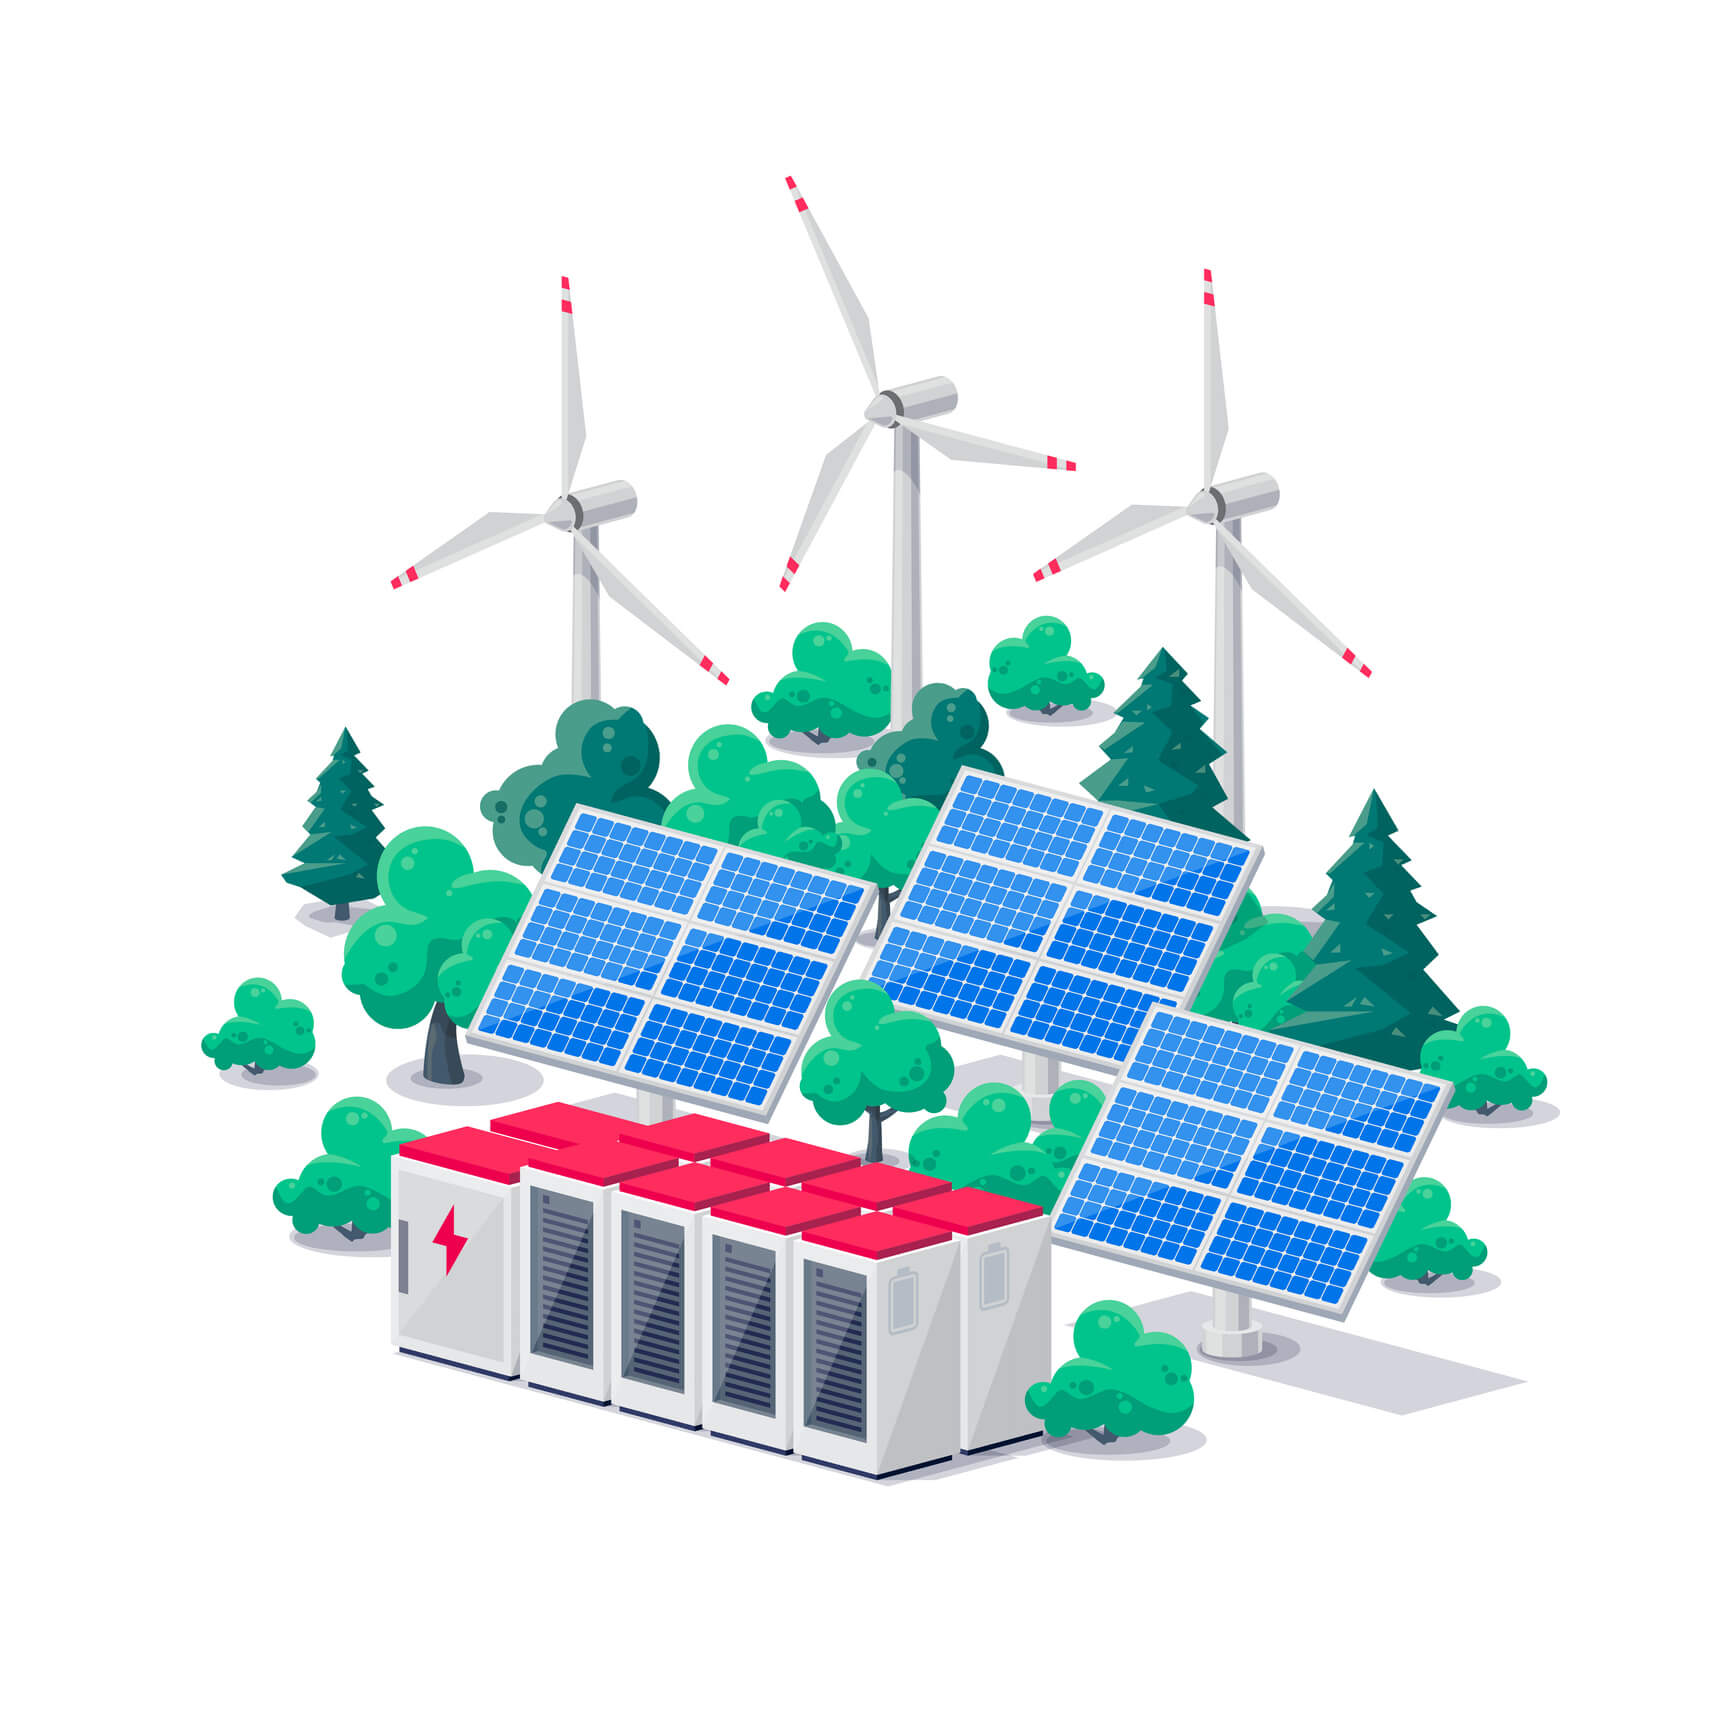 Illustration of solar battery storage units with solar panels and wind turbines.